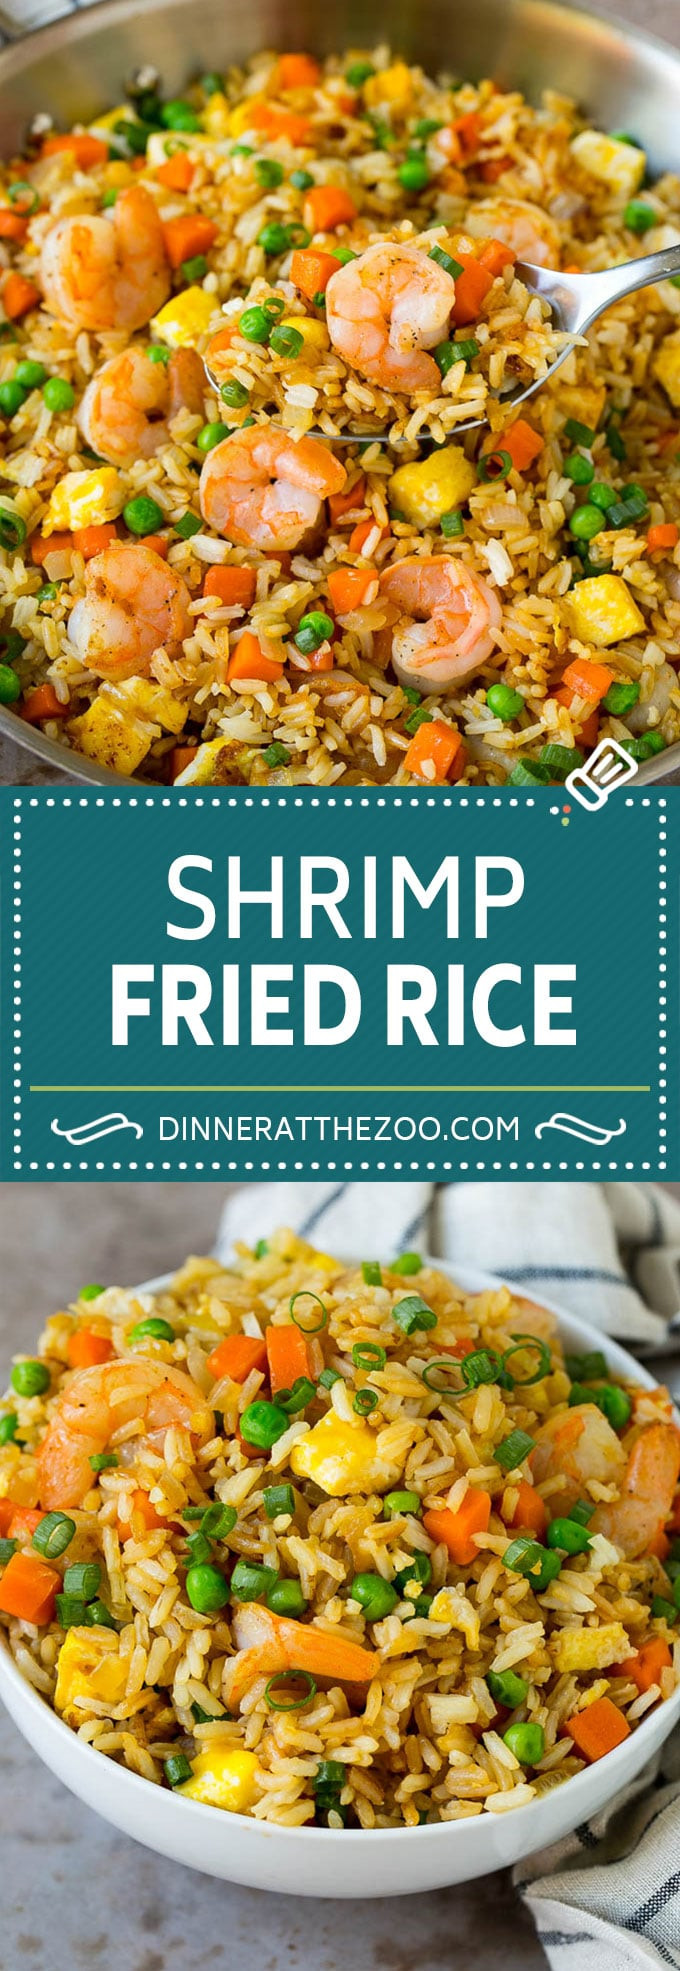 Seafood Fried Rice Recipe Chinese
 Shrimp Fried Rice Dinner at the Zoo